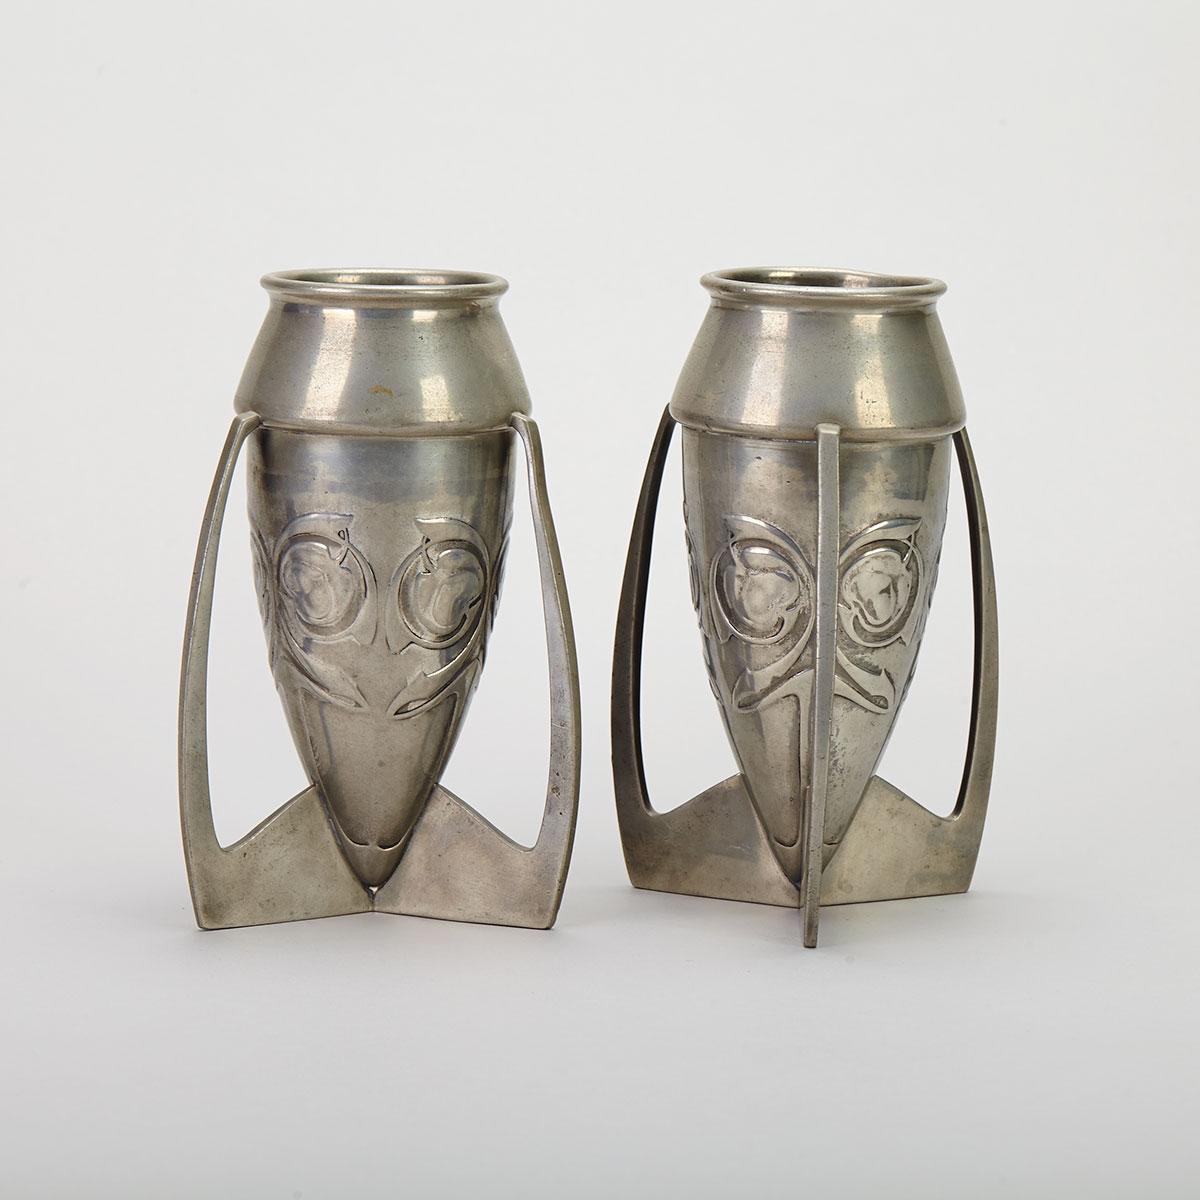 Archibald Knox for Liberty & Co. Pair of Tudric Pewter Vases, c.1900